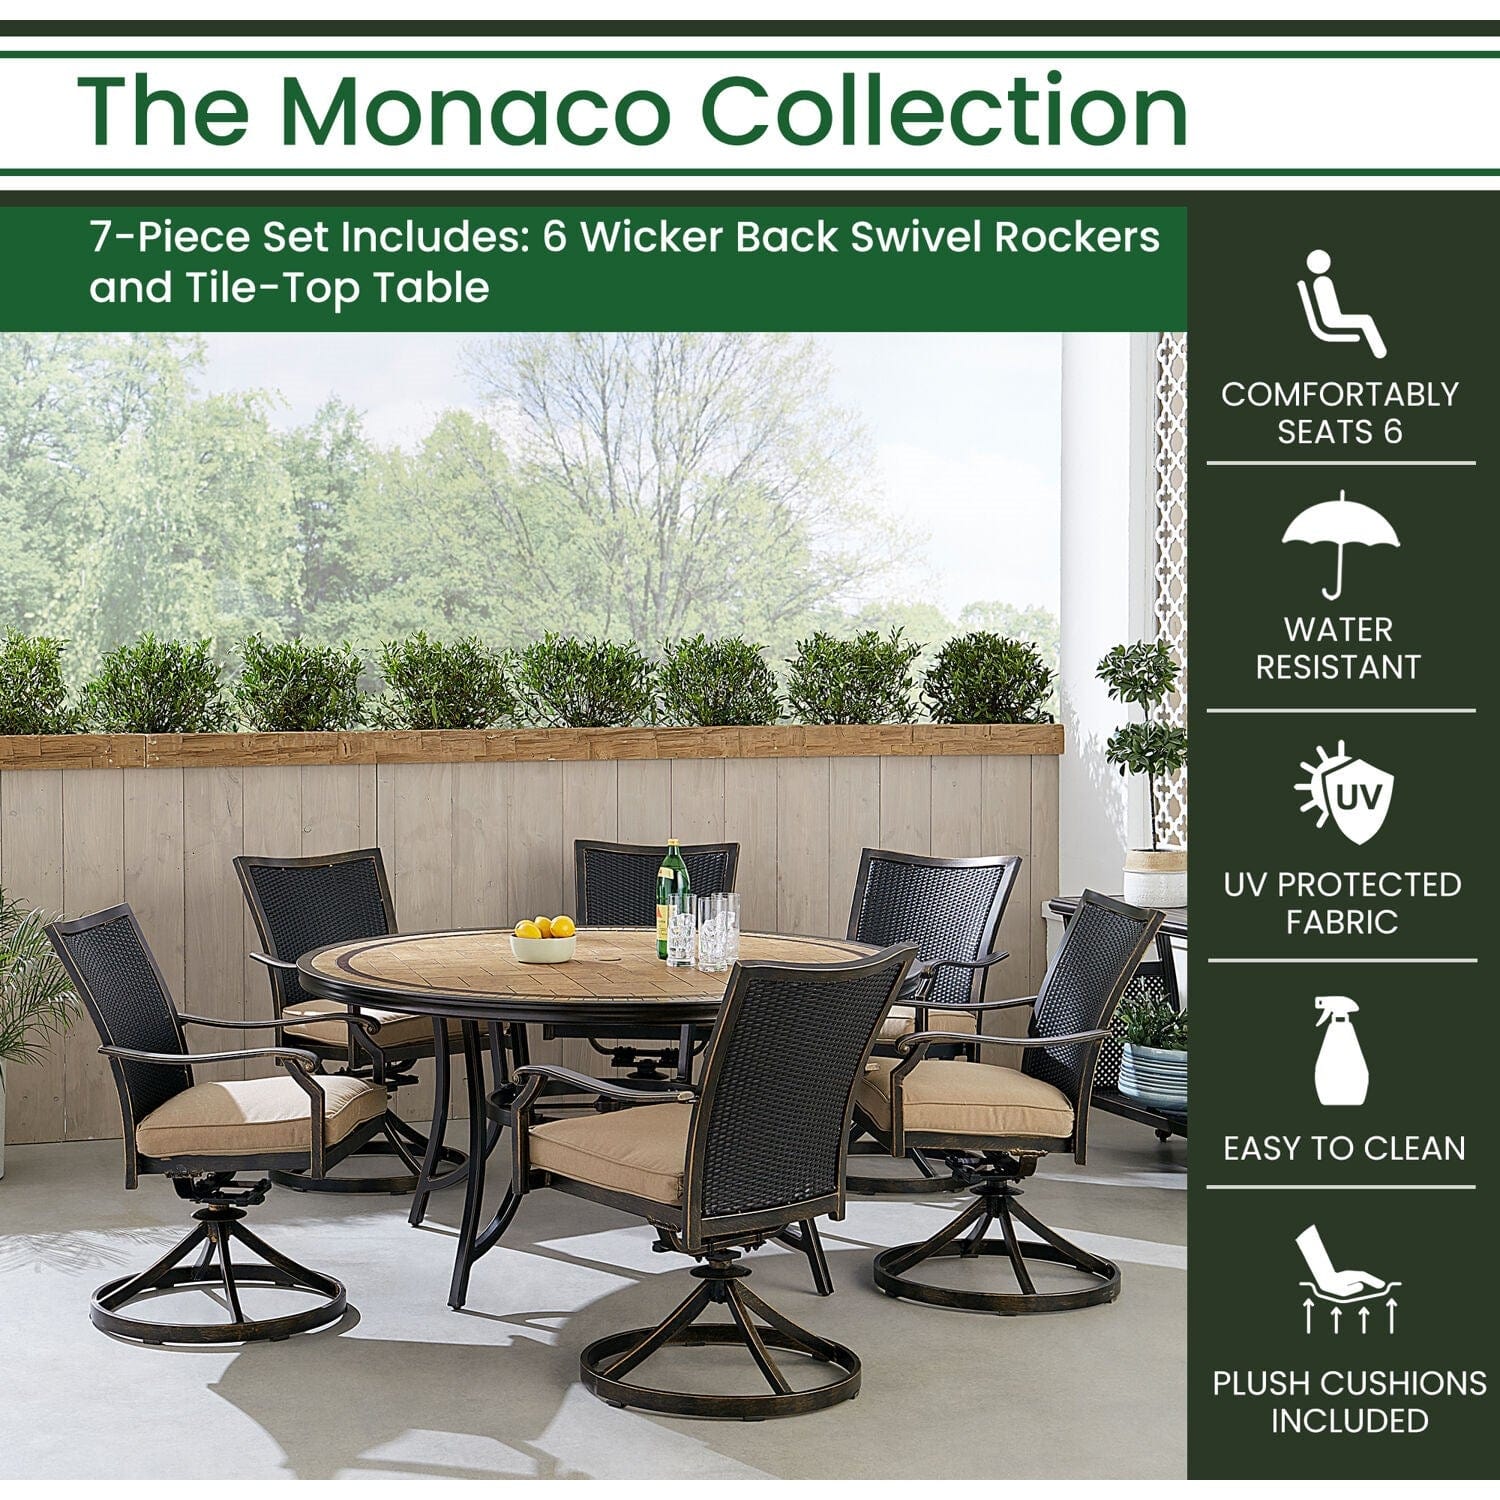 Hanover Outdoor Dining Set Hanover Monaco 7-Piece Dining Set in Tan with 6 Wicker Back Swivel Rockers and a 60-in. Tile-Top Table | MONDNWB7PCSW6RDTL-TAN